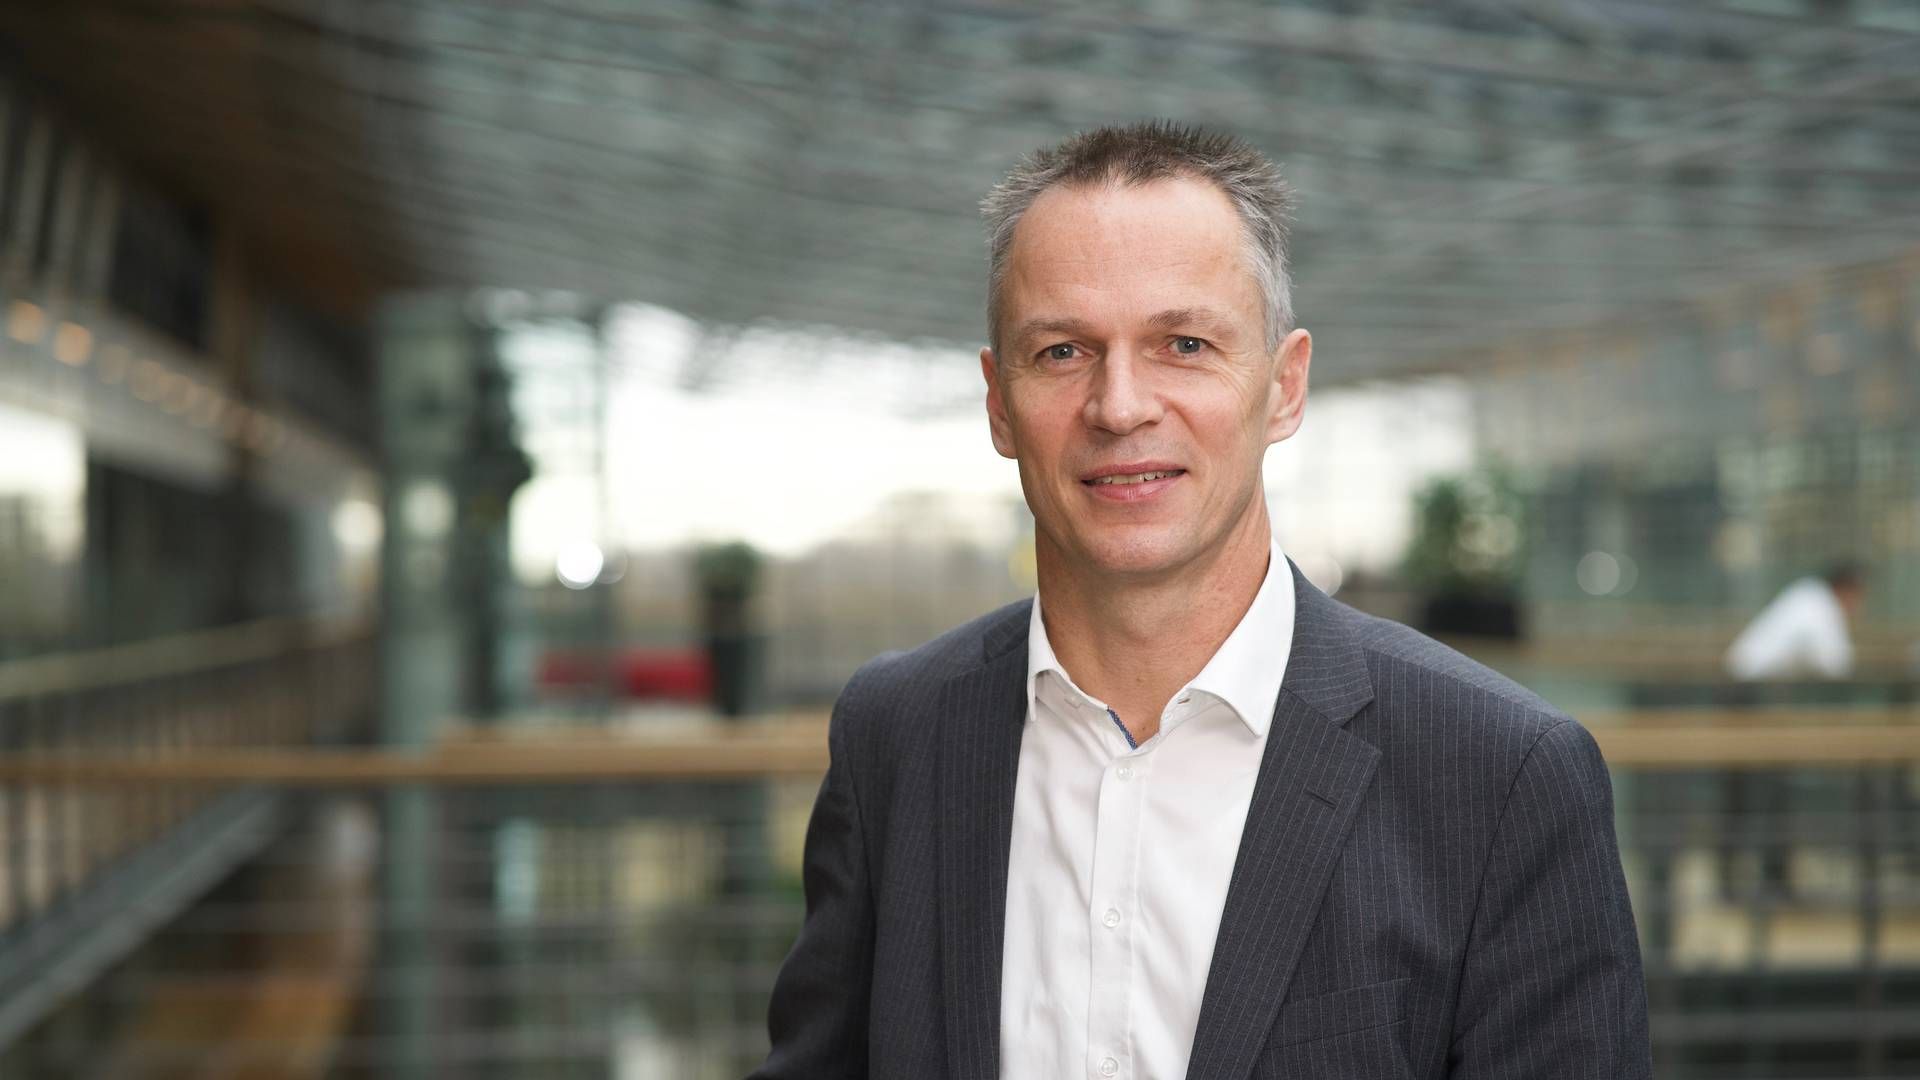 "Private investors and companies that are willing to buy the carbon credits will be necessary to help finance carbon capture. Otherwise, the projects won’t work, even with government support" says Ole Thomsen, Senior Vice President at Ørsted | Photo: Pr/ørsted